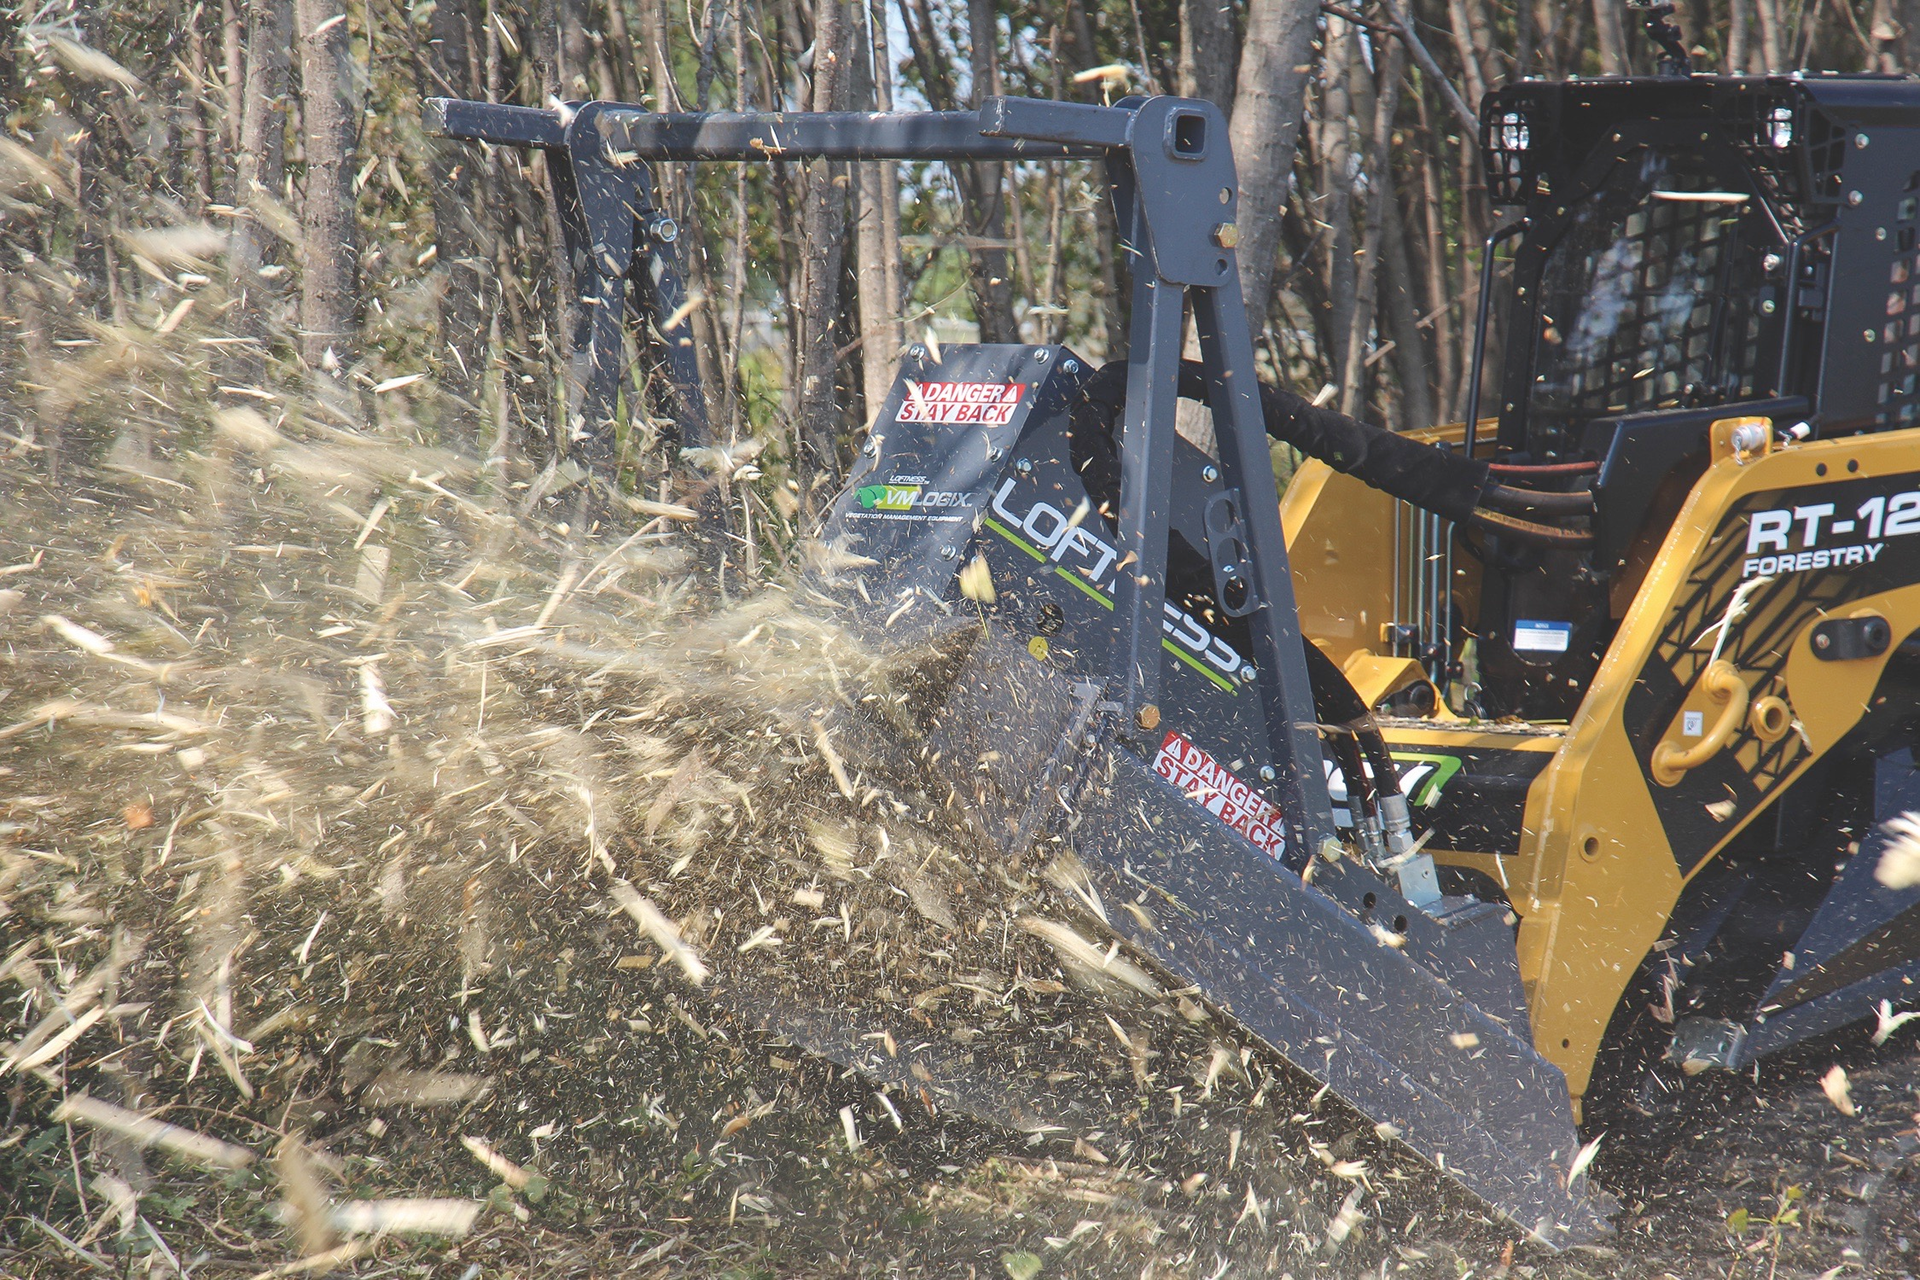 Loftness Bad Ax on compact track loader clearing land